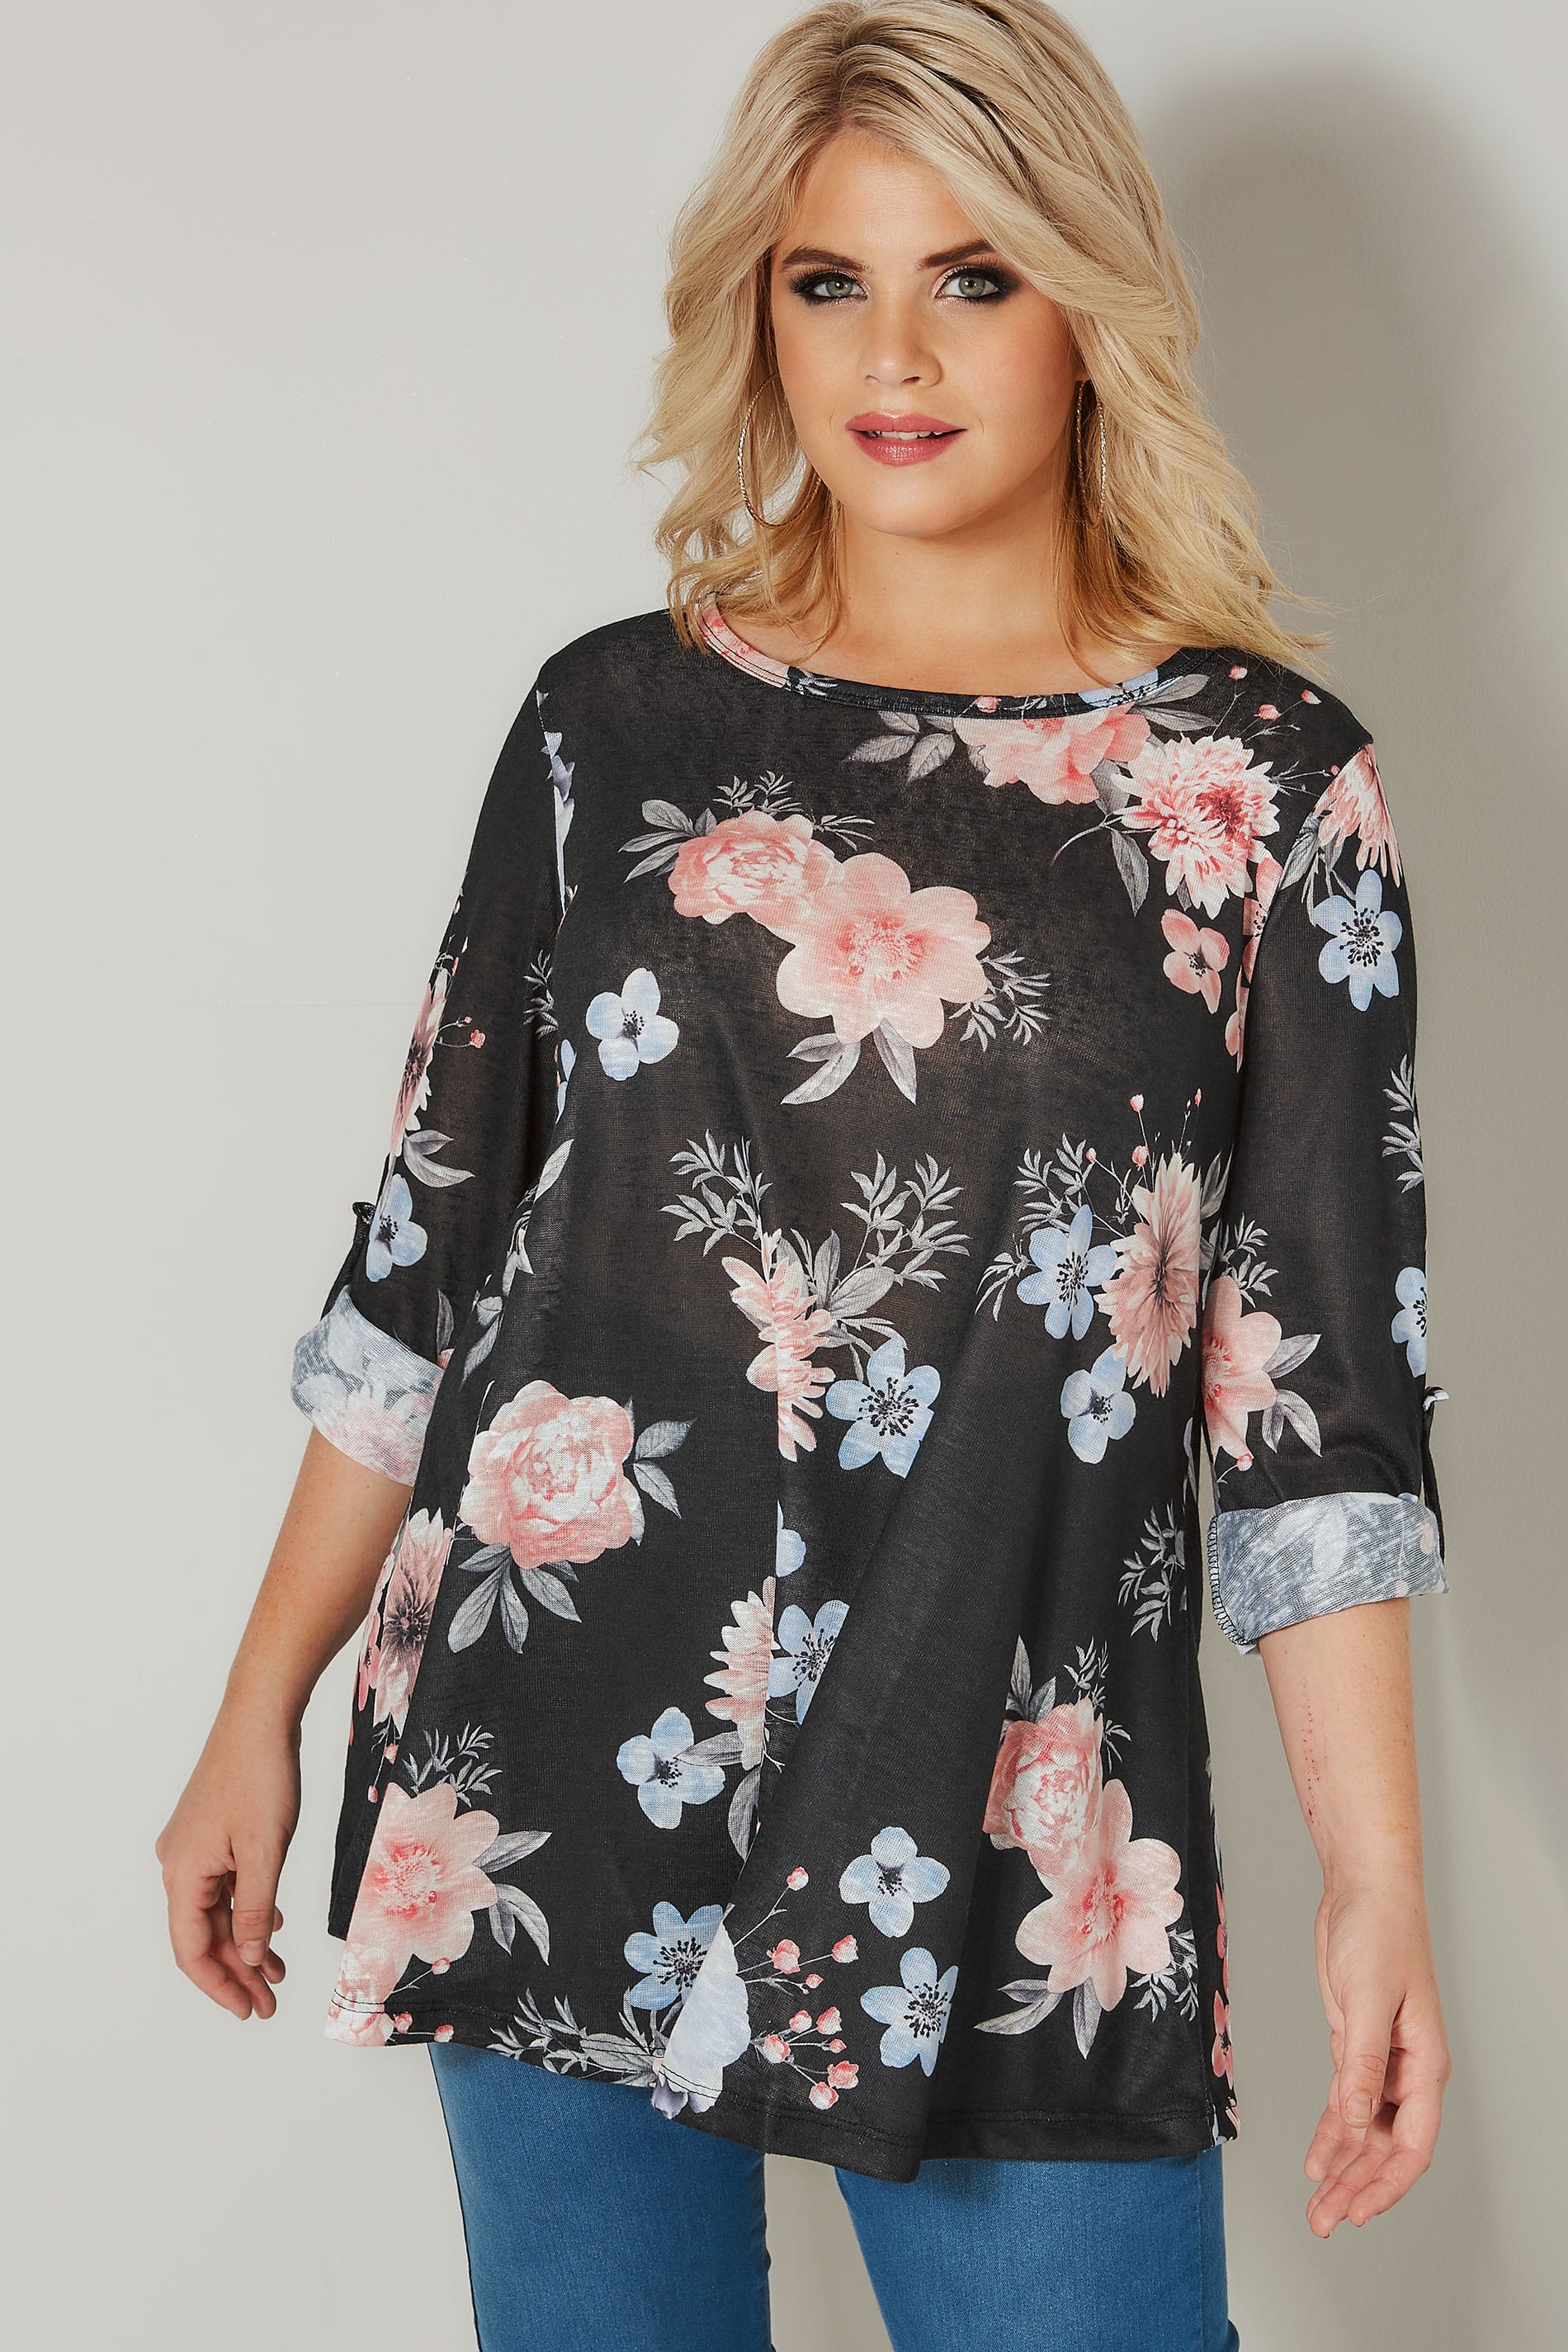 Black & Multi Floral Roll Sleeve Top, plus size 16 to 36